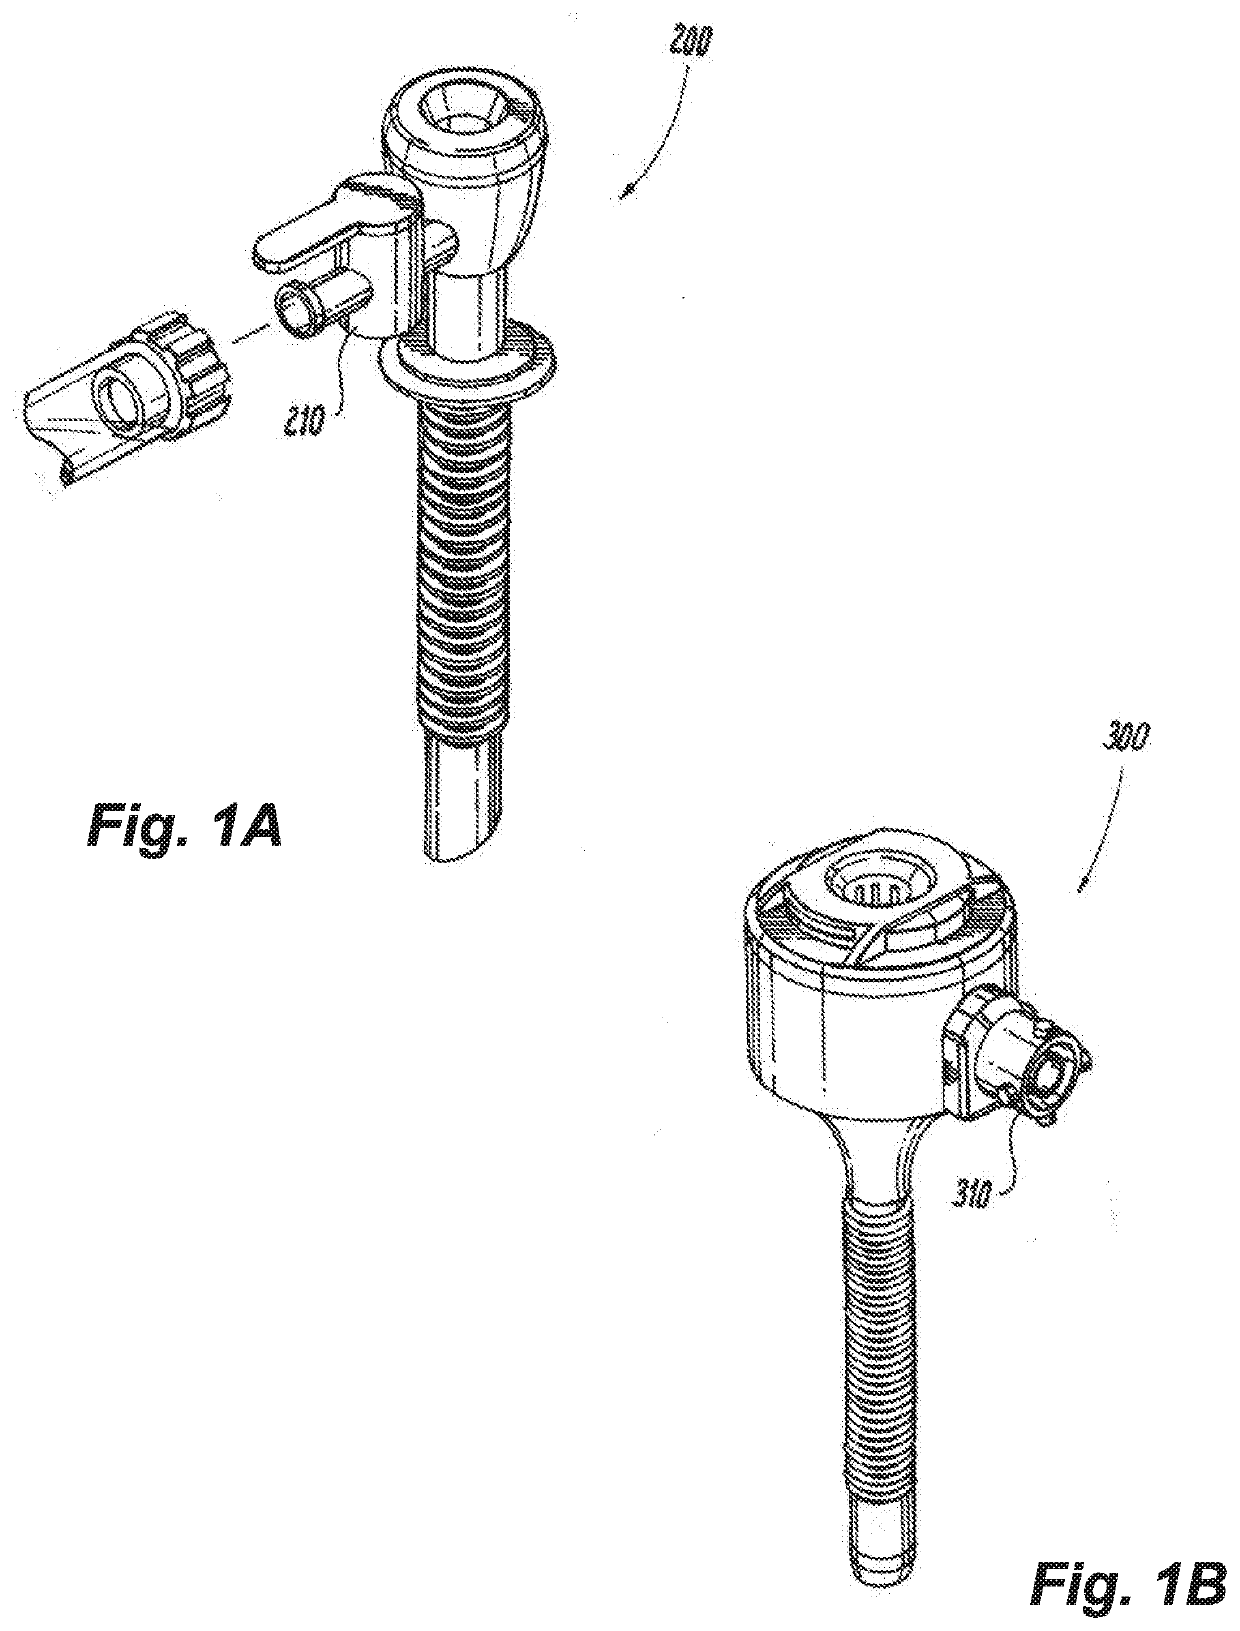 Multi-modal five lumen gas circulation system for use in endoscopic surgical procedures